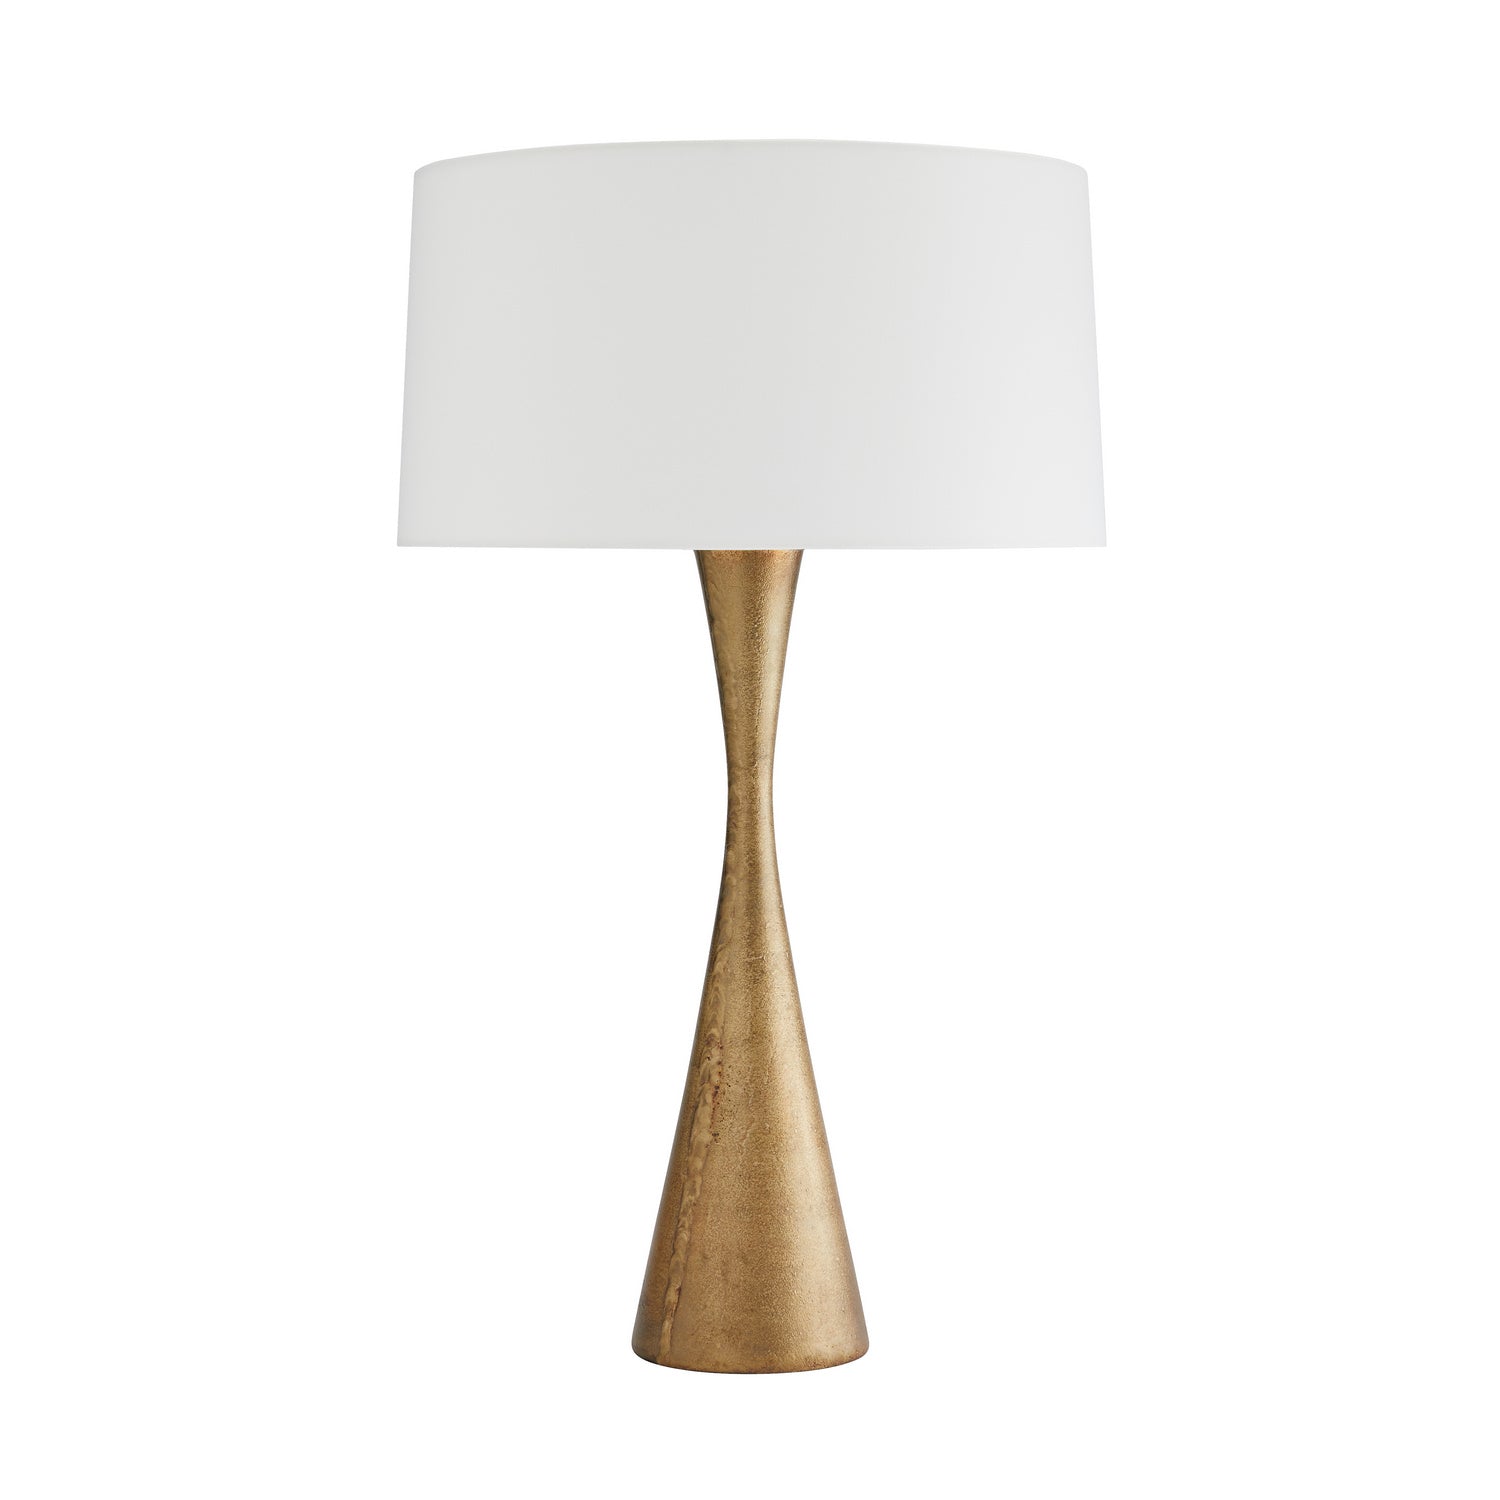 One Light Lamp from the Narsi collection in Antique Brass finish